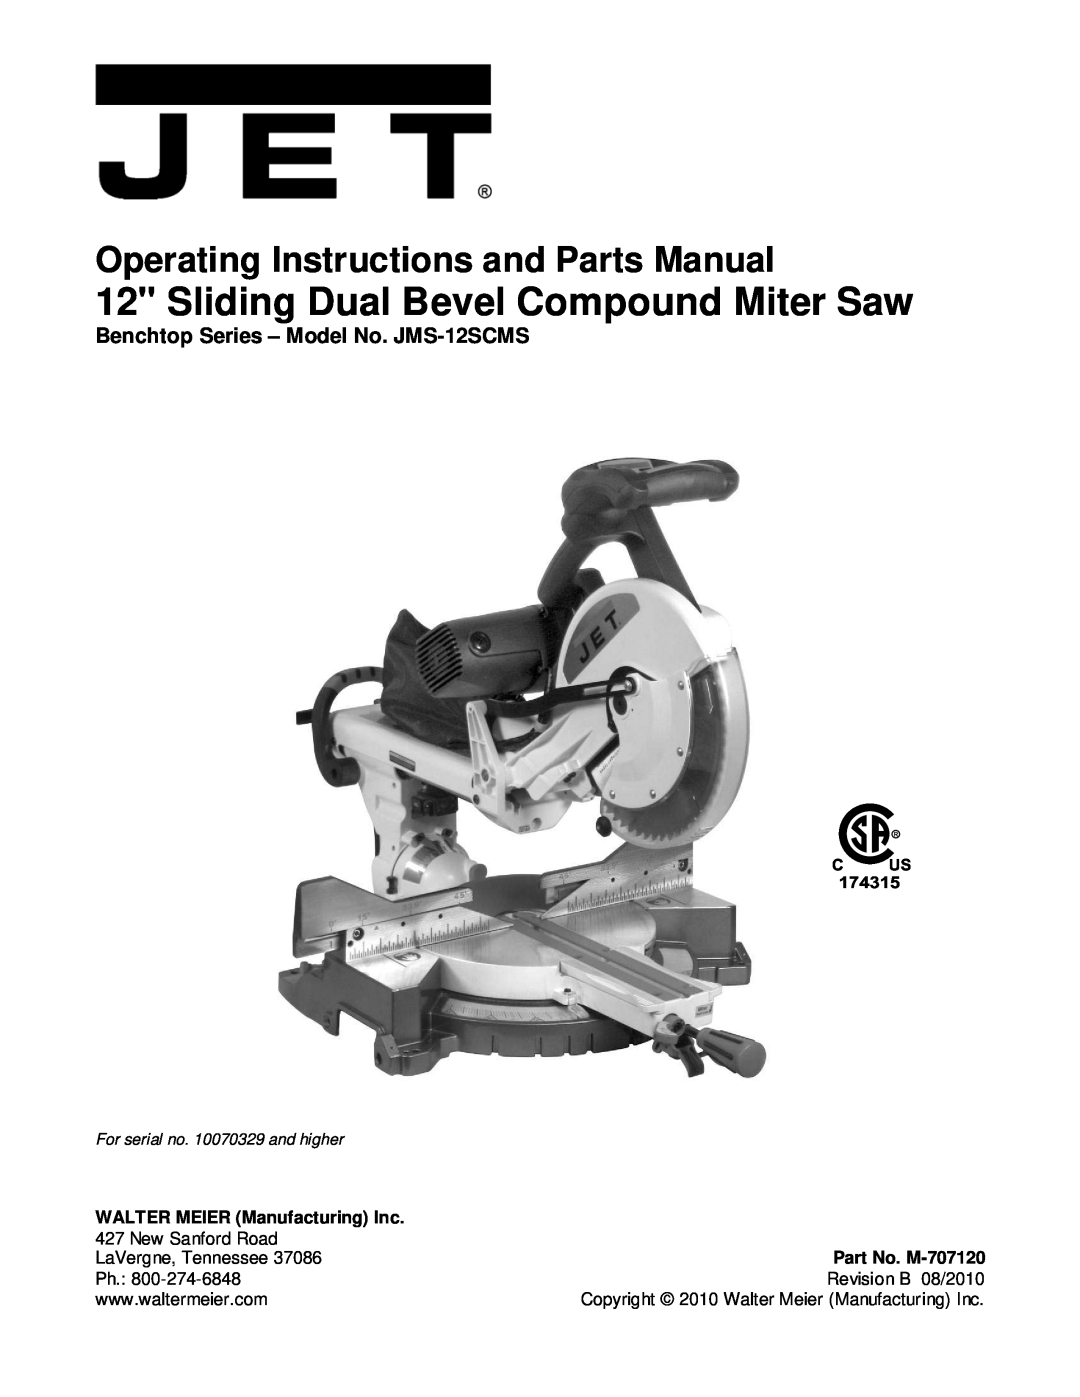 Jet Tools JMS-12SCMS specifications Dual Bevel Sliding Compound Miter Saw, HEAVY-DUTYB3NCH, ••The Woodworkers Choice For 